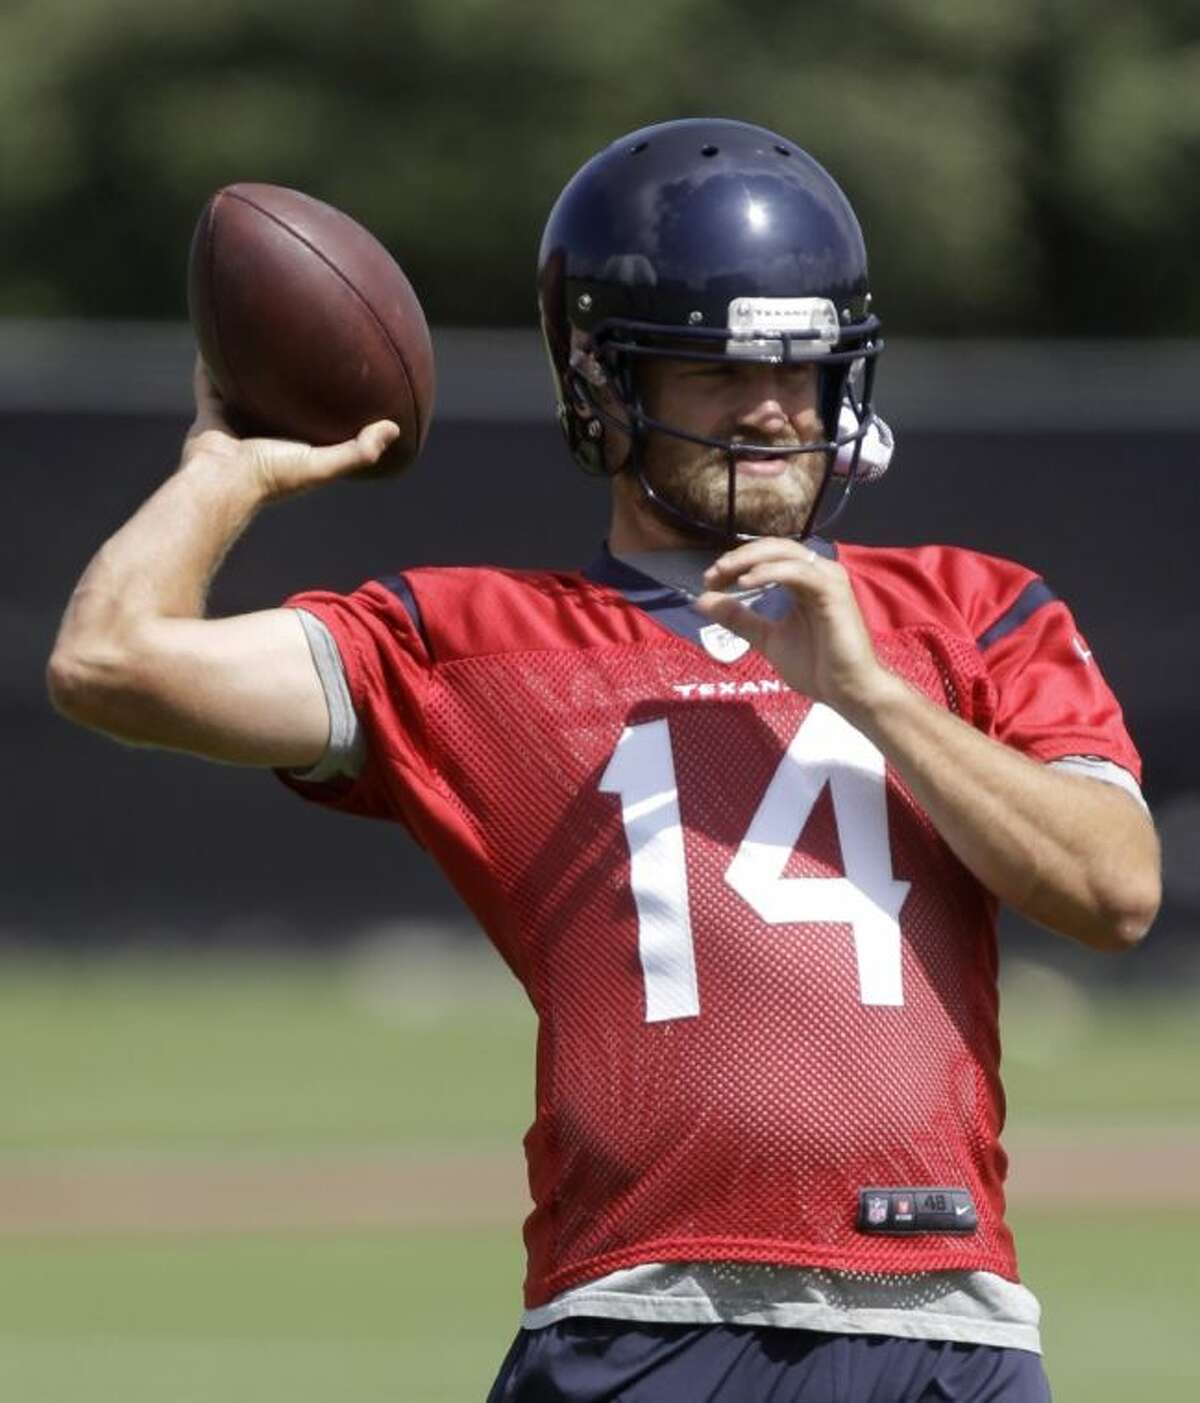 Houston Texans quarterback Ryan Fitzpatrick has been named the starter by first-year coach Bill O’Brien.